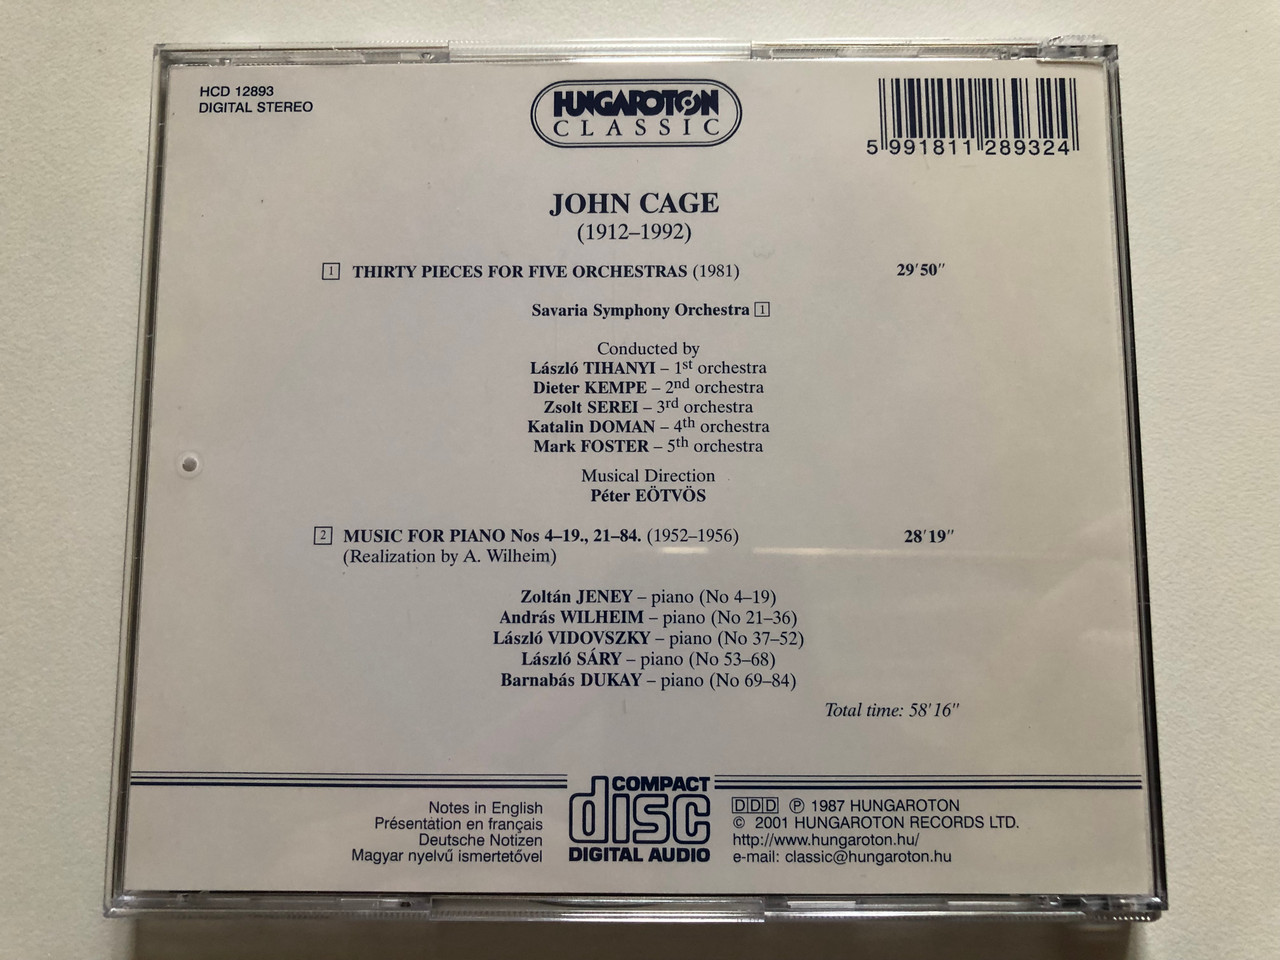 https://cdn10.bigcommerce.com/s-62bdpkt7pb/products/0/images/310791/Cage_Thirty_Pieces_For_Five_Orchestras_Music_For_Piano_Hungaroton_Classic_Audio_CD_2001_Stereo_HCD_12893_2__91908.1699454428.1280.1280.JPG?c=2